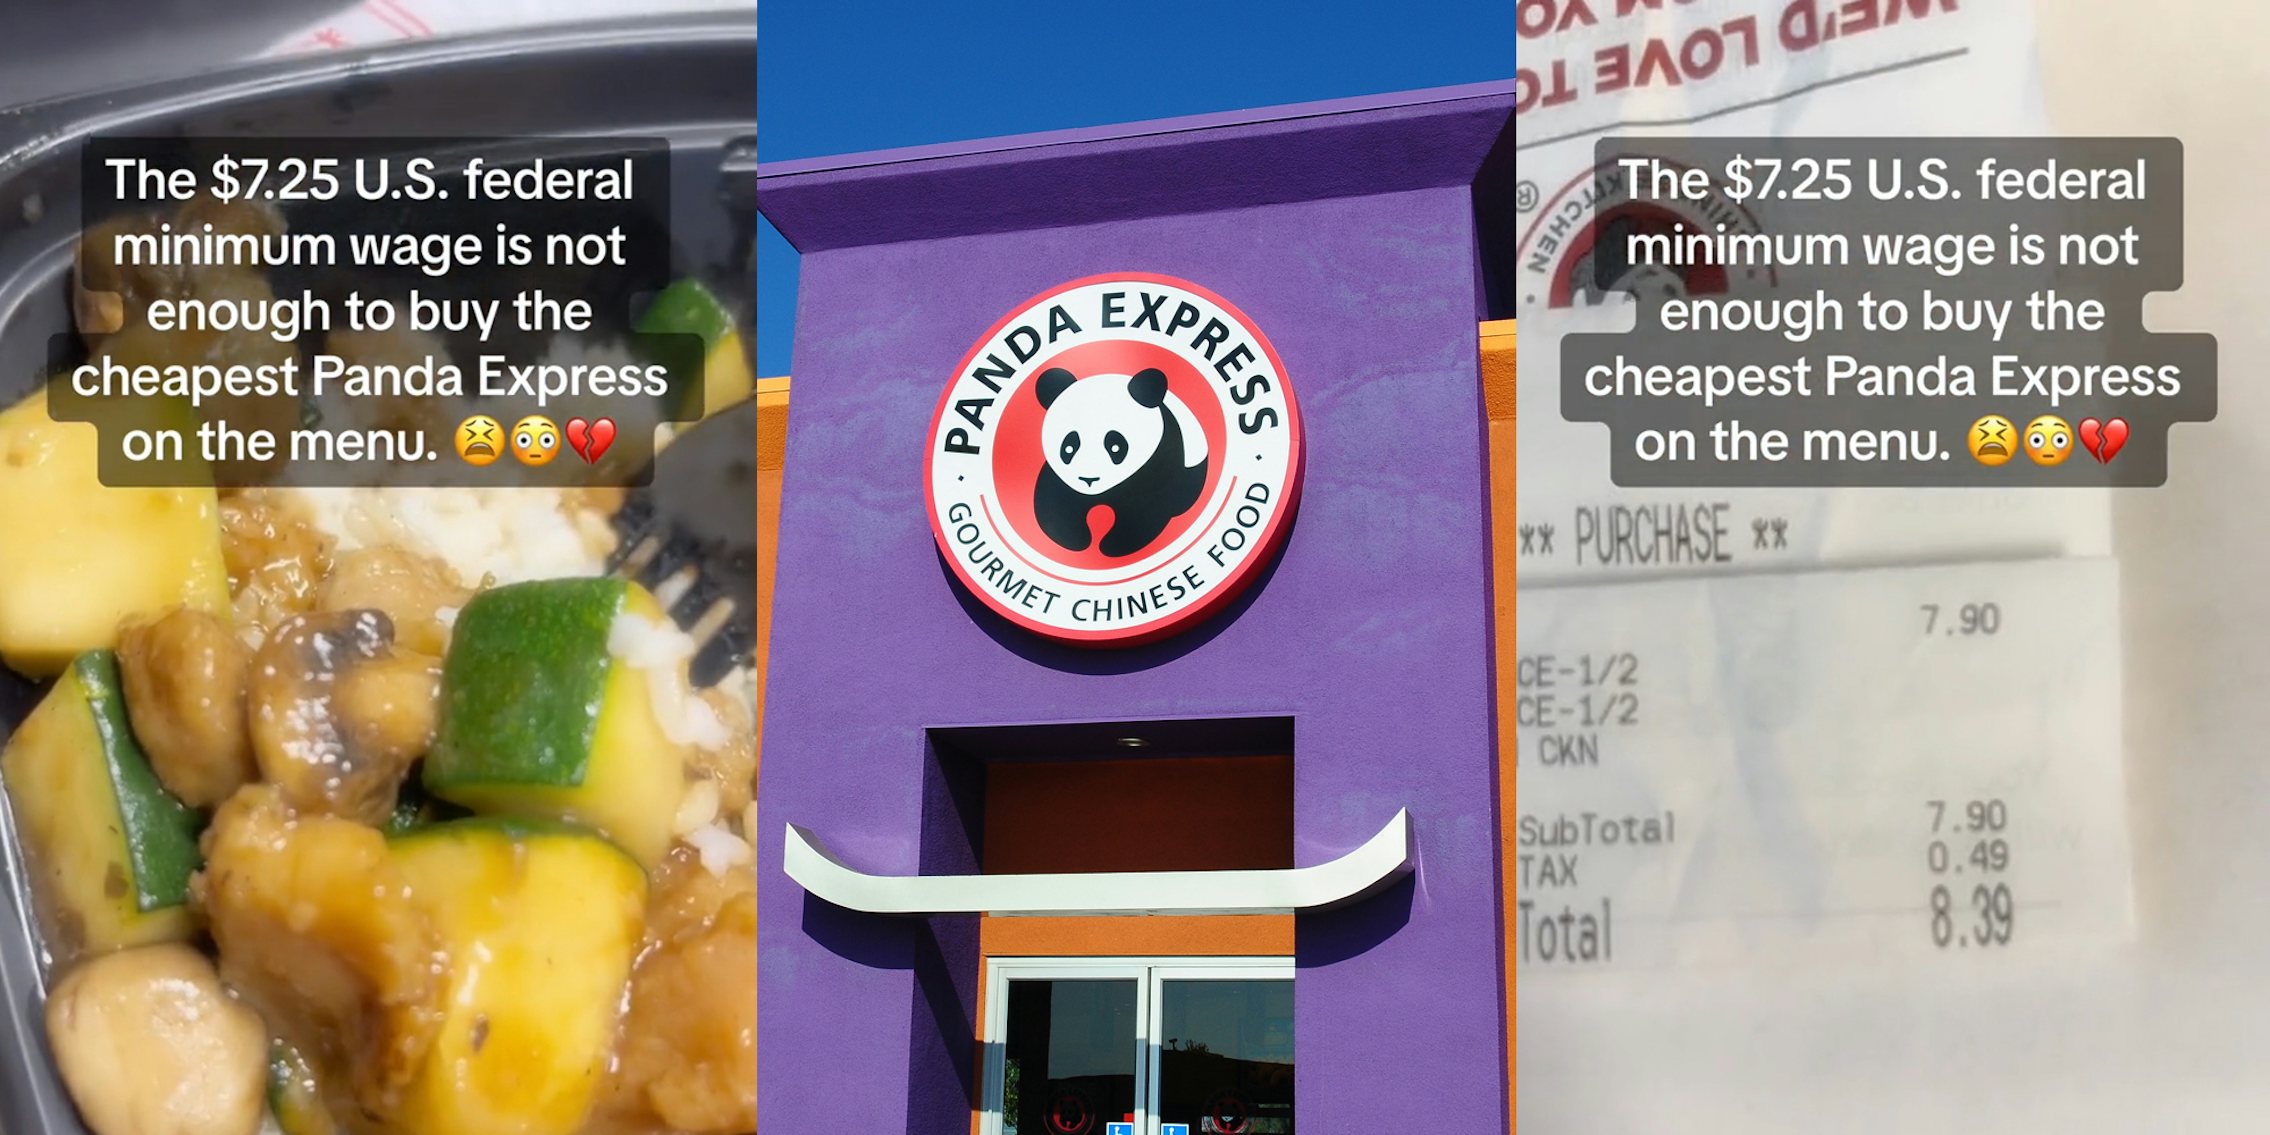 Panda Express food with caption 'The $7.25 U.S. federal minimum wage is not enough to buy the cheapest Panda Express on the menu.' (l) Panda express building with sign (c) Panda Express receipt with caption 'The $7.25 U.S. federal minimum wage is not enough to buy the cheapest Panda Express on the menu.' (r)